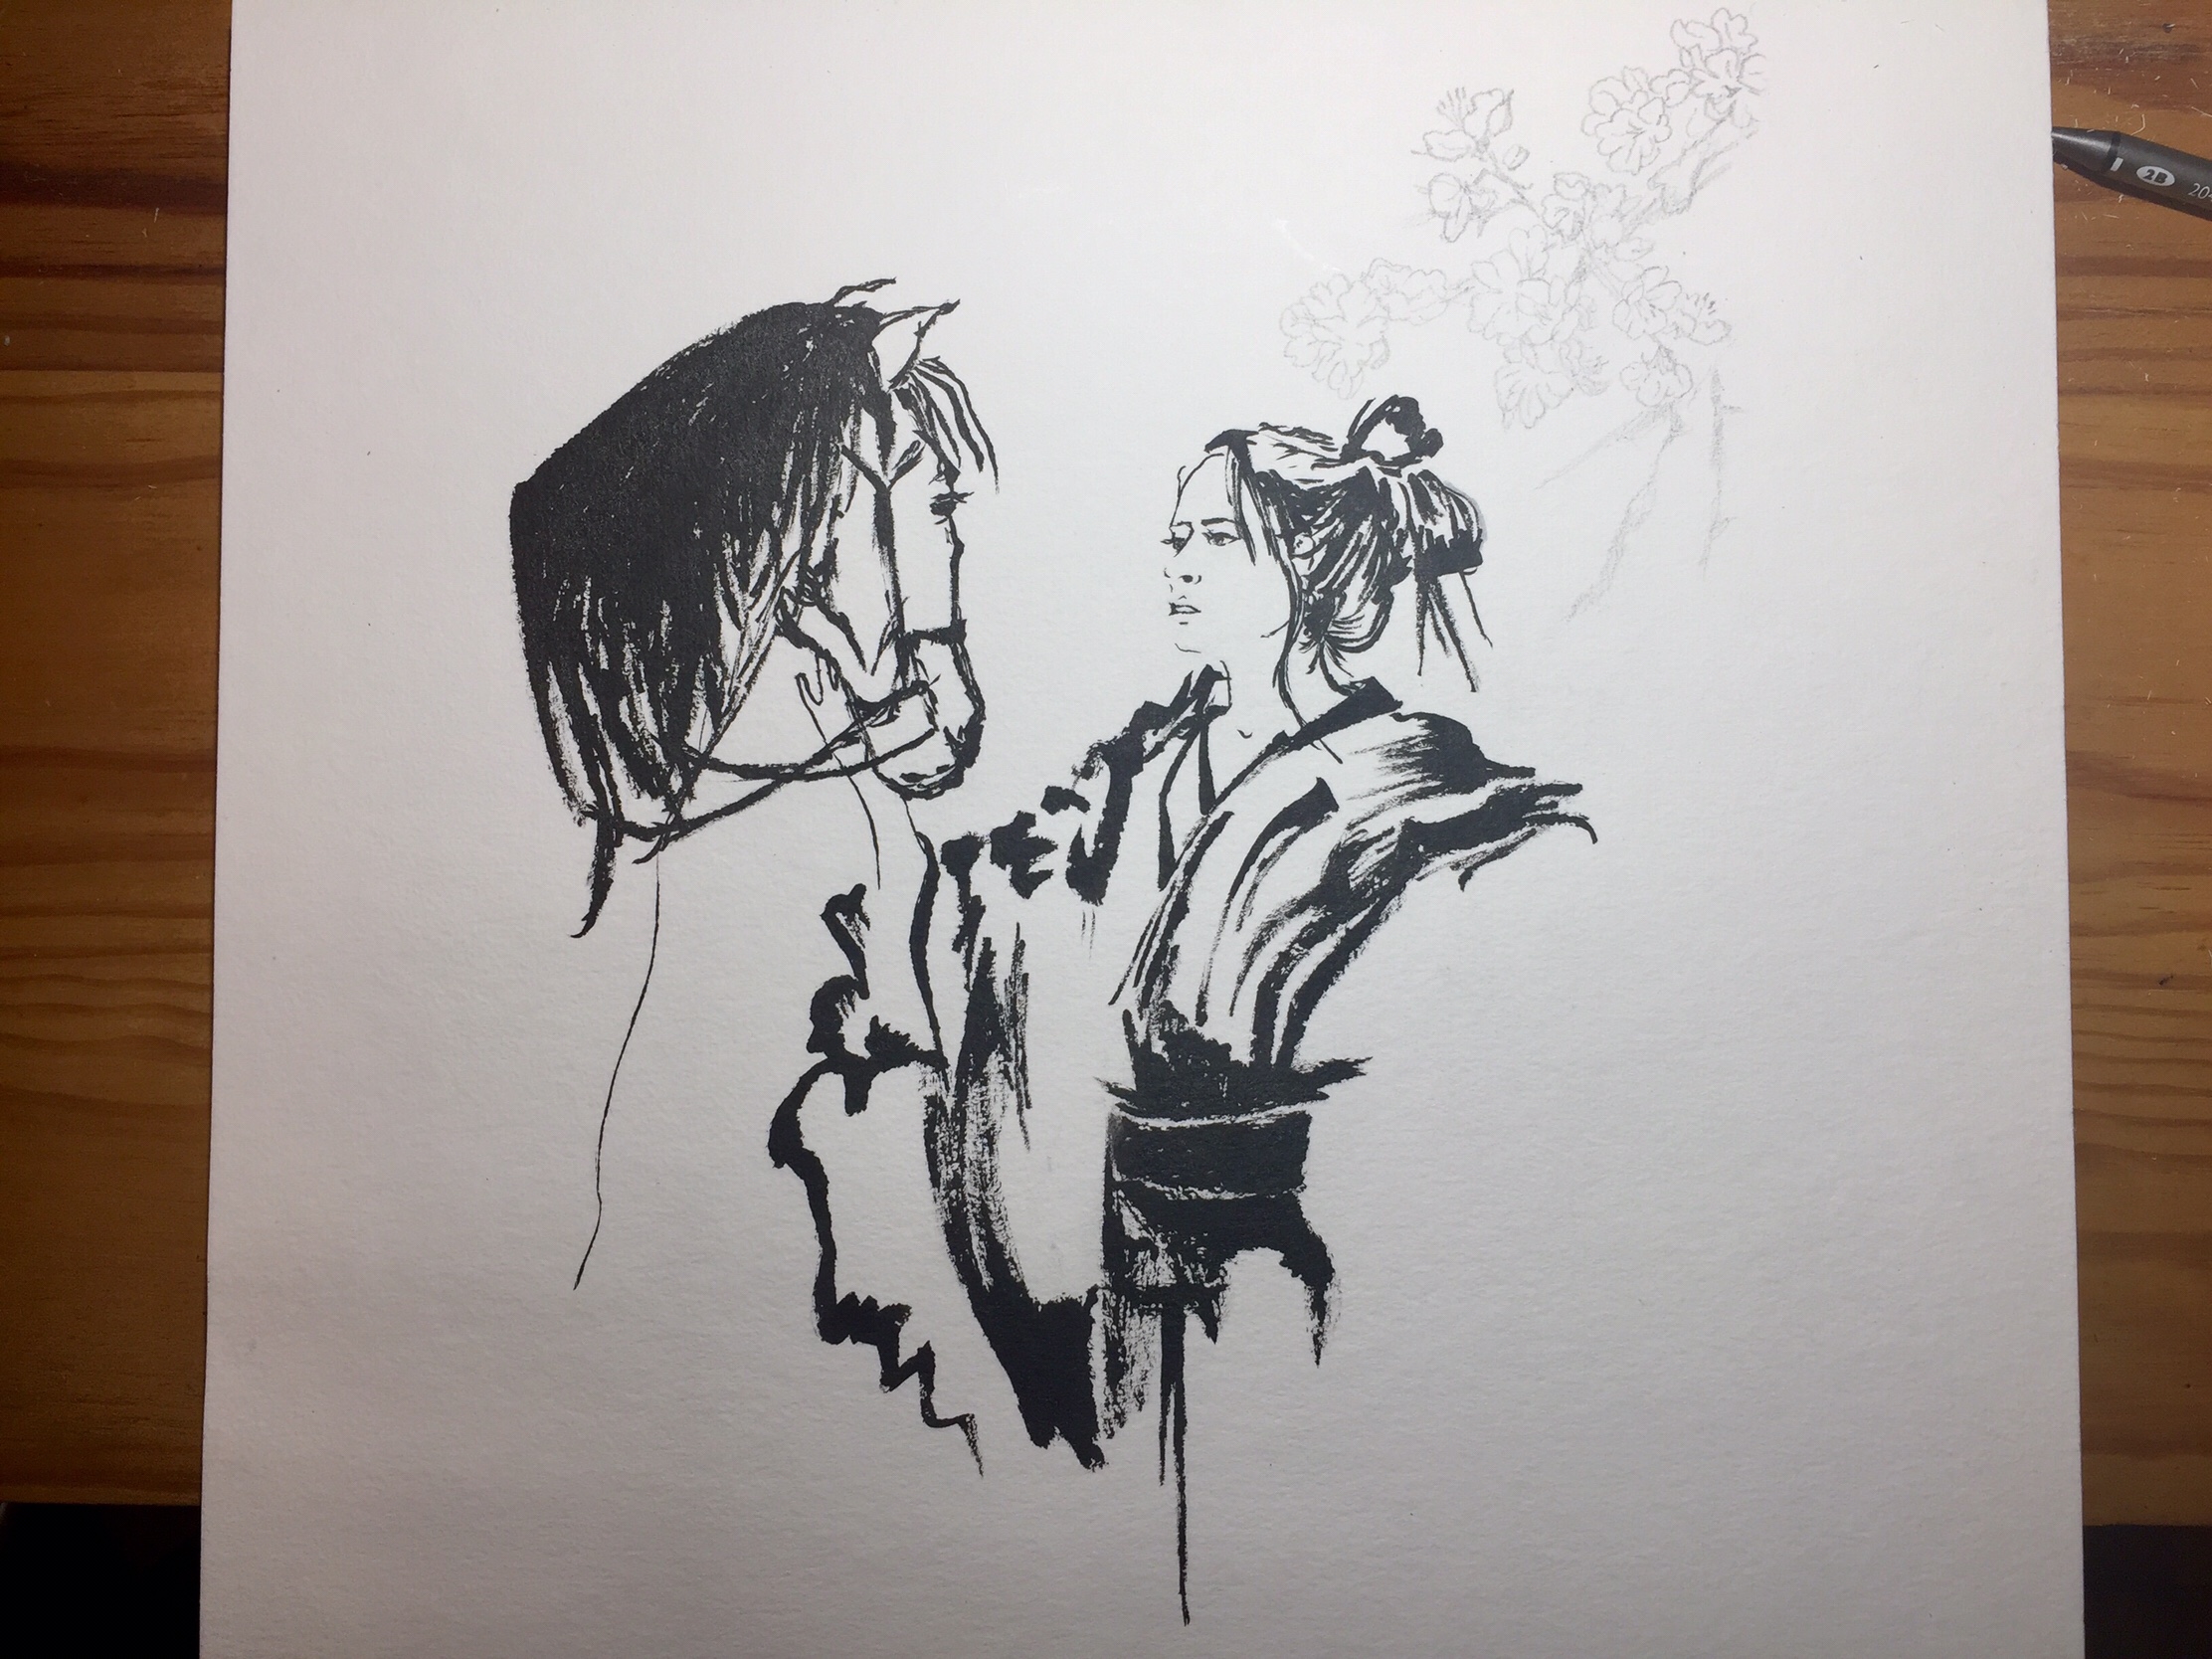 Inking in black of the horse, woman and kimono